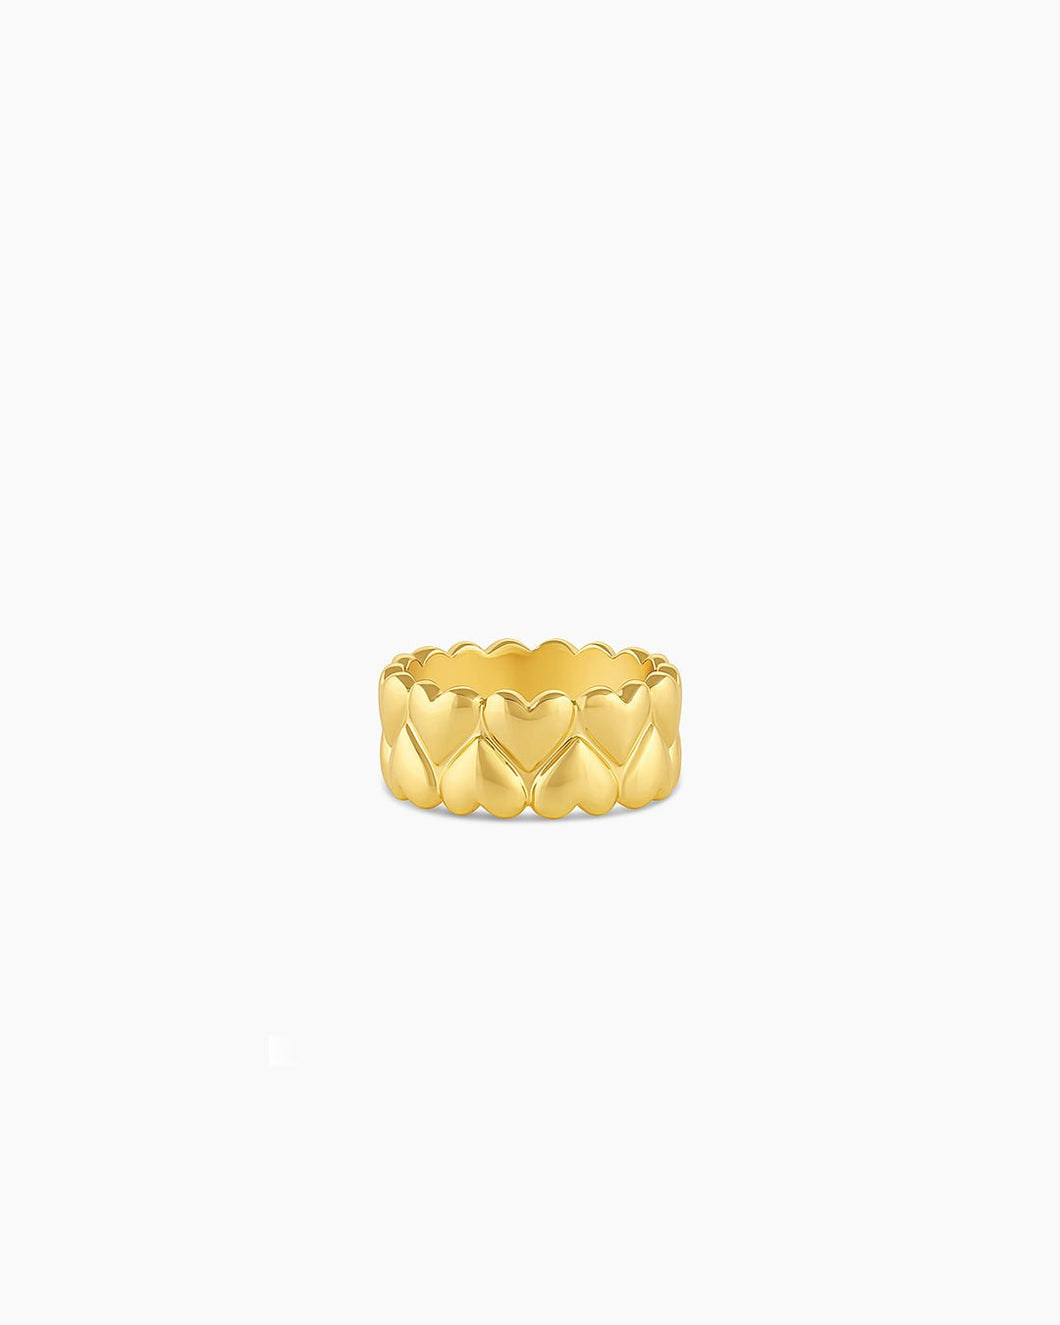 GOR Lou Heart Statement Ring